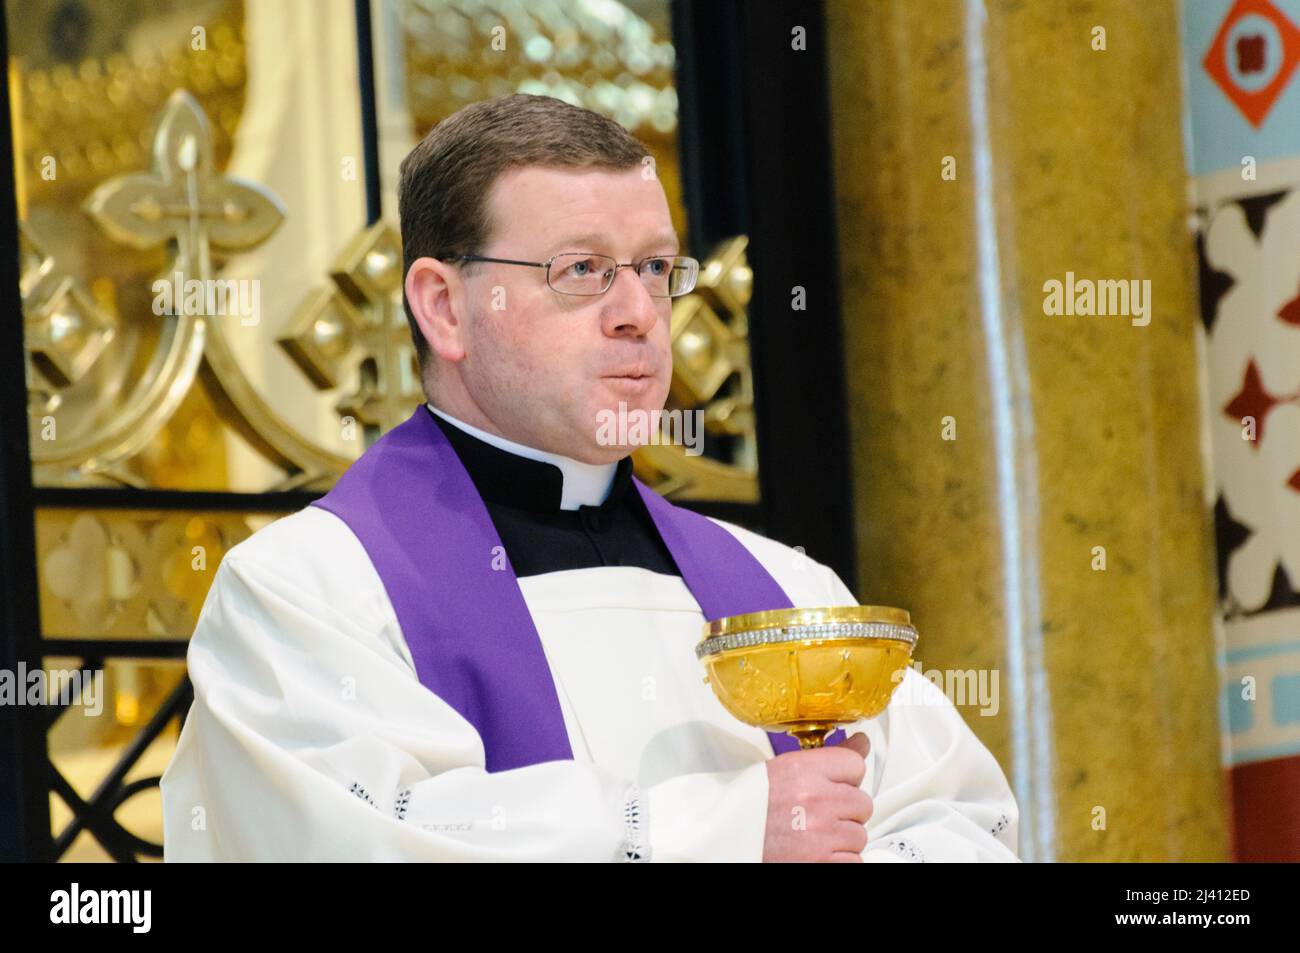 Belfast, Northern Ireland. 2nd January 2010. A priest holds a gold chalice during the requiem mass of Cardinal Cahal Daly at Saint Peter's Cathedral. Stock Photo